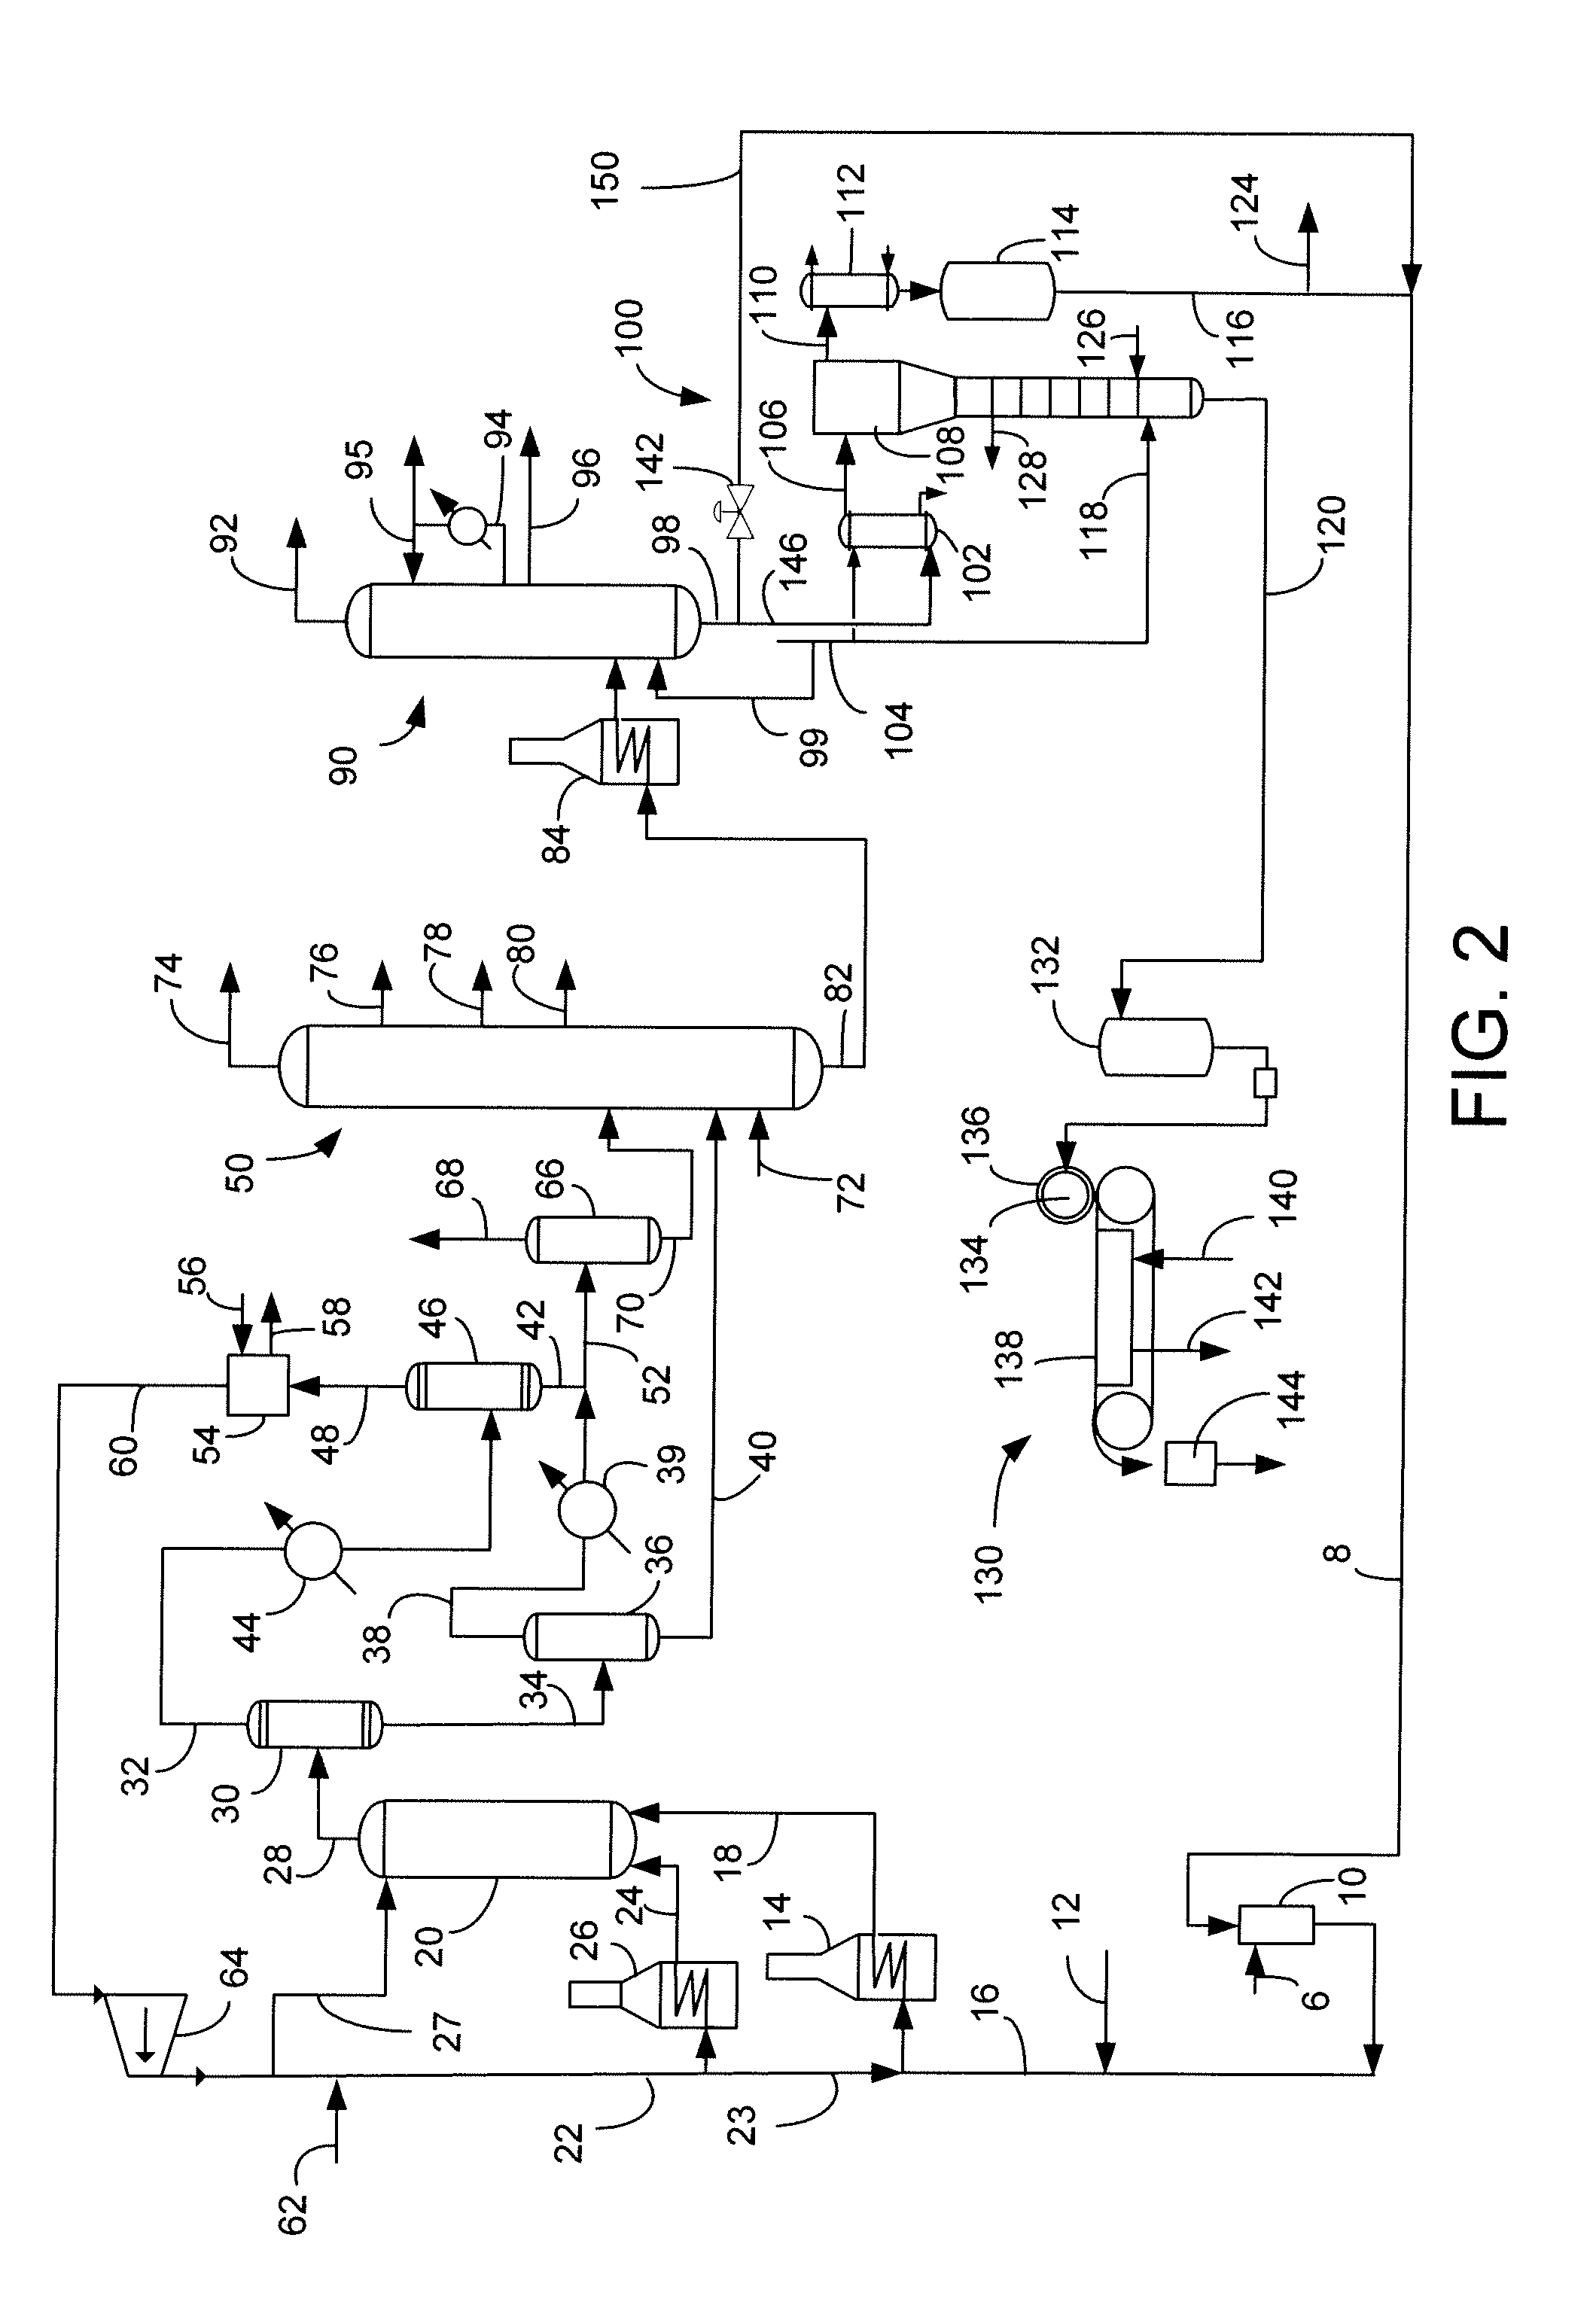 Apparatus for Separating Pitch from Slurry Hydrocracked Vacuum Gas Oil